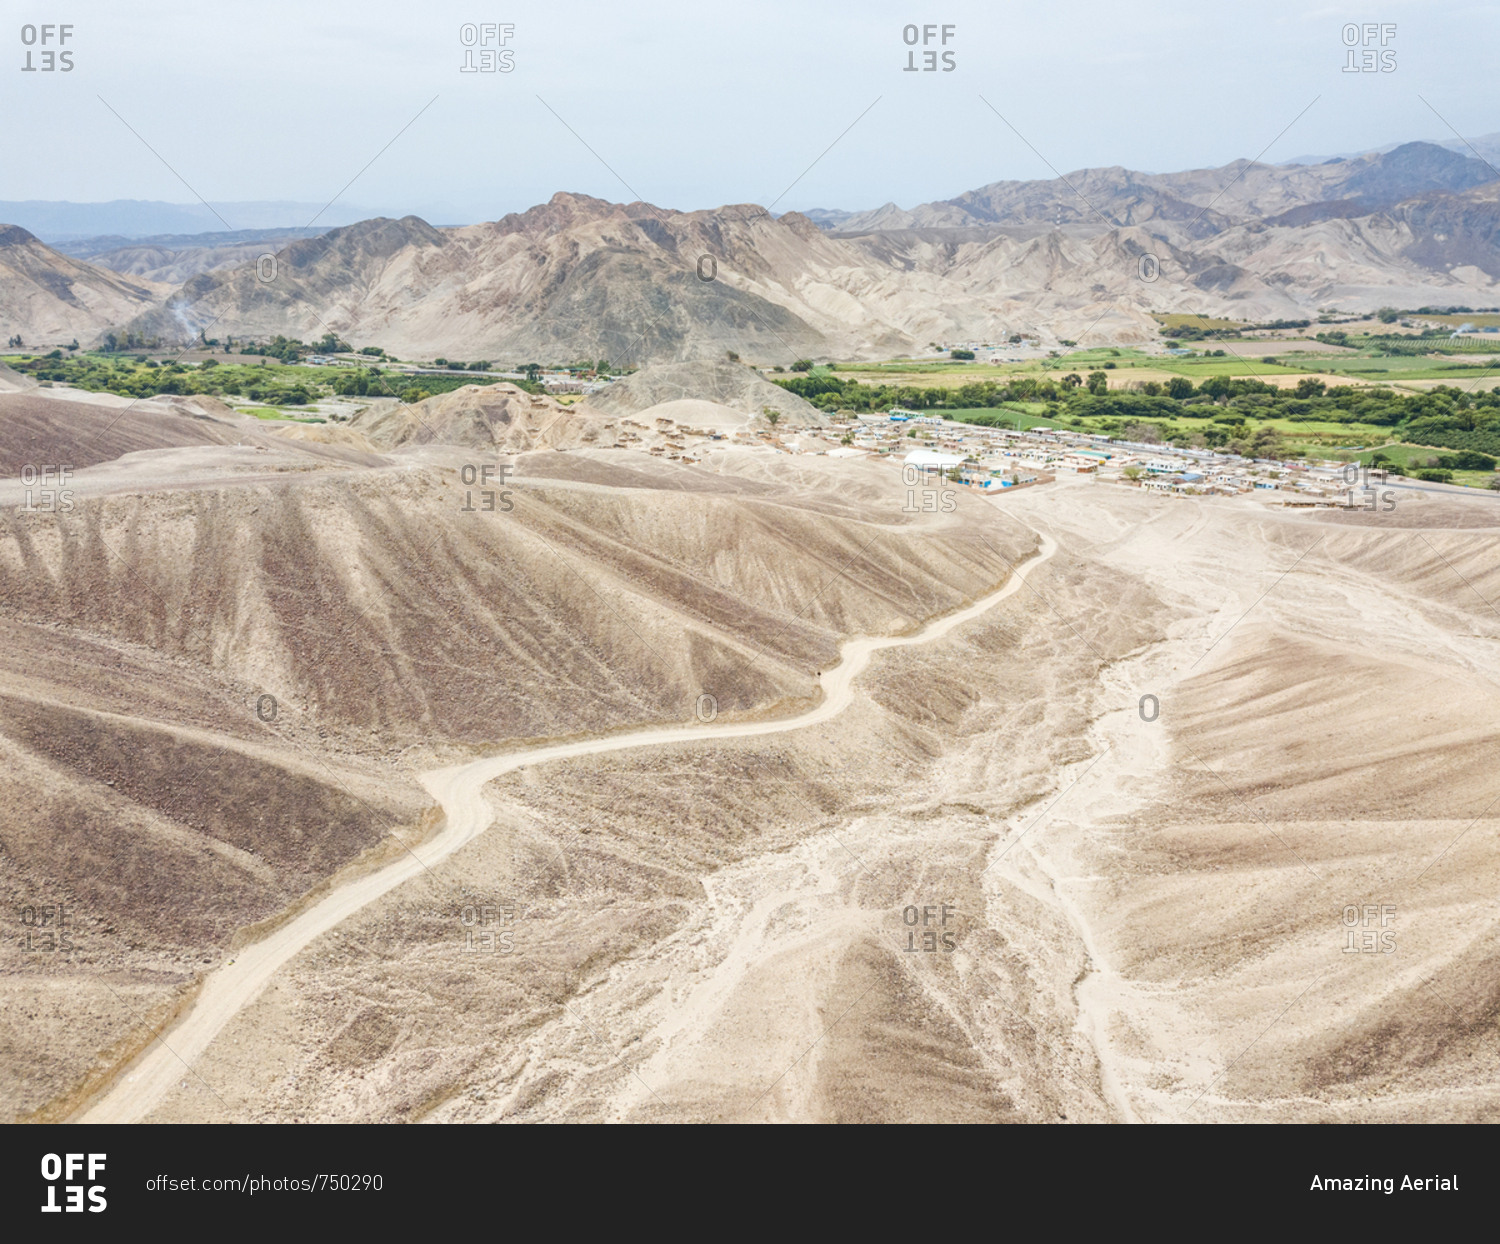 Aerial view of Nazca desert, town and mountains, Peru